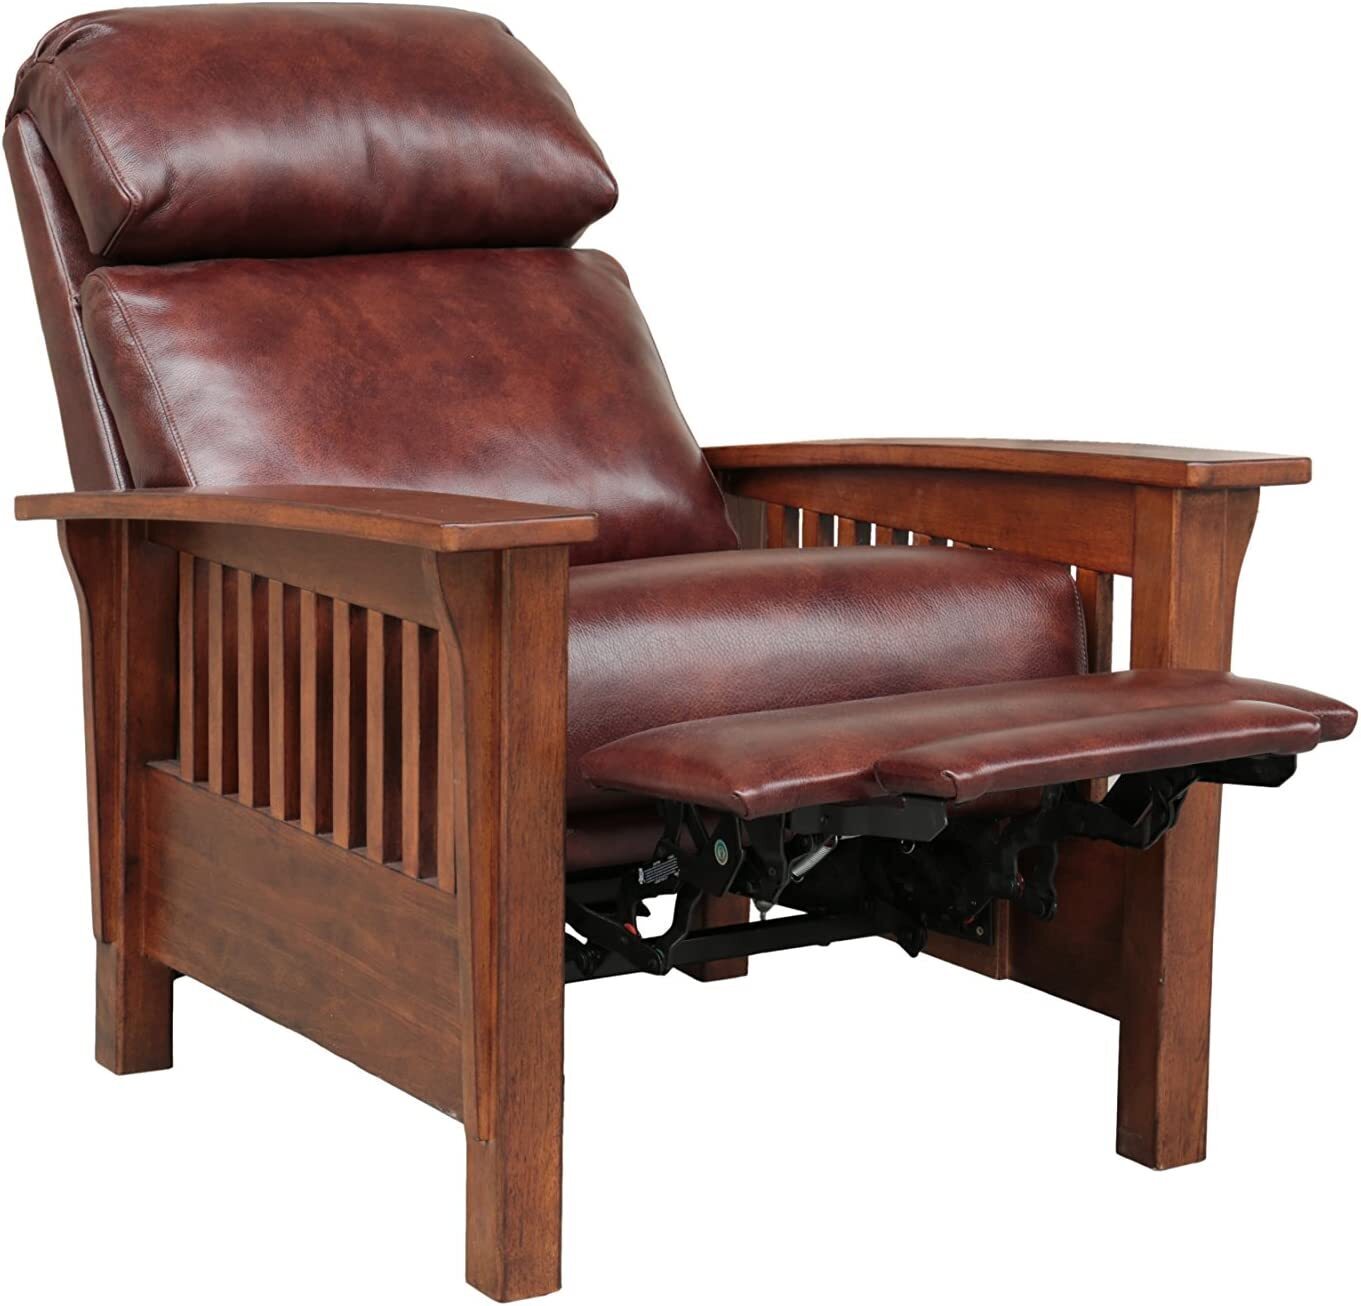 Barcalounger Craftsman All Leather Push Back Recliner Chair